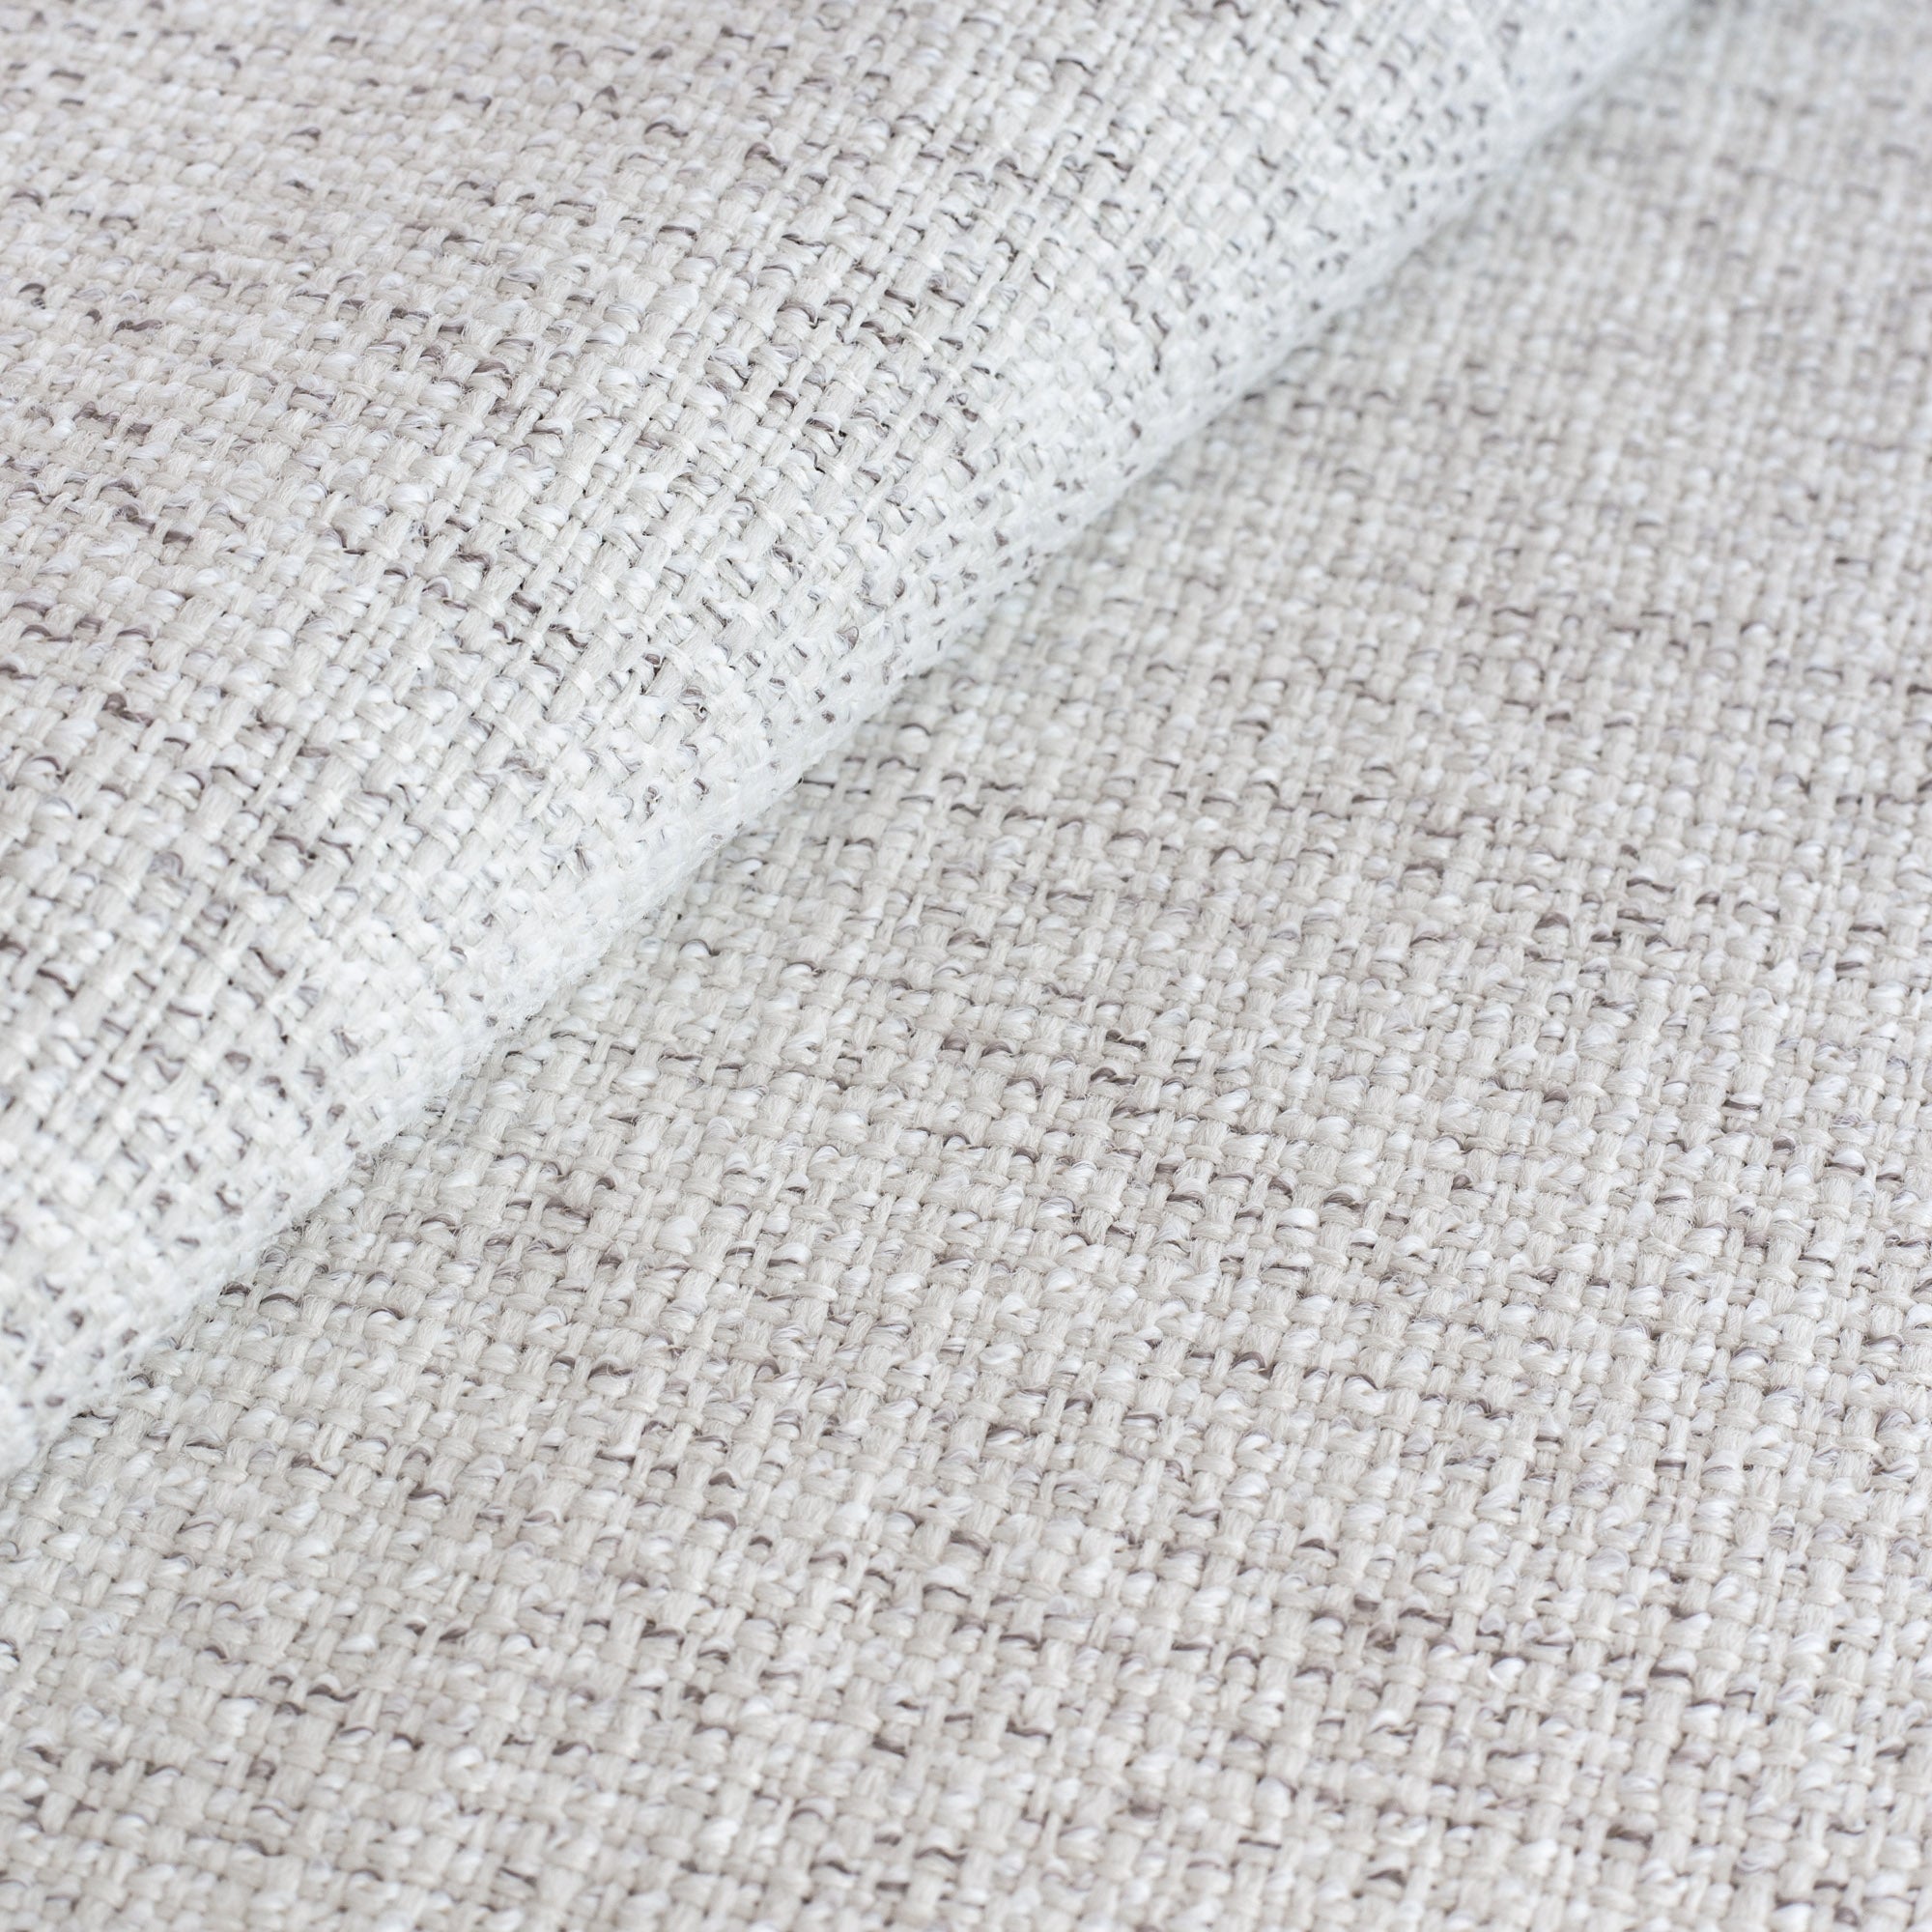 Preston Birch performance upholstery fabric, a light cream fabric, with strands of warm gray